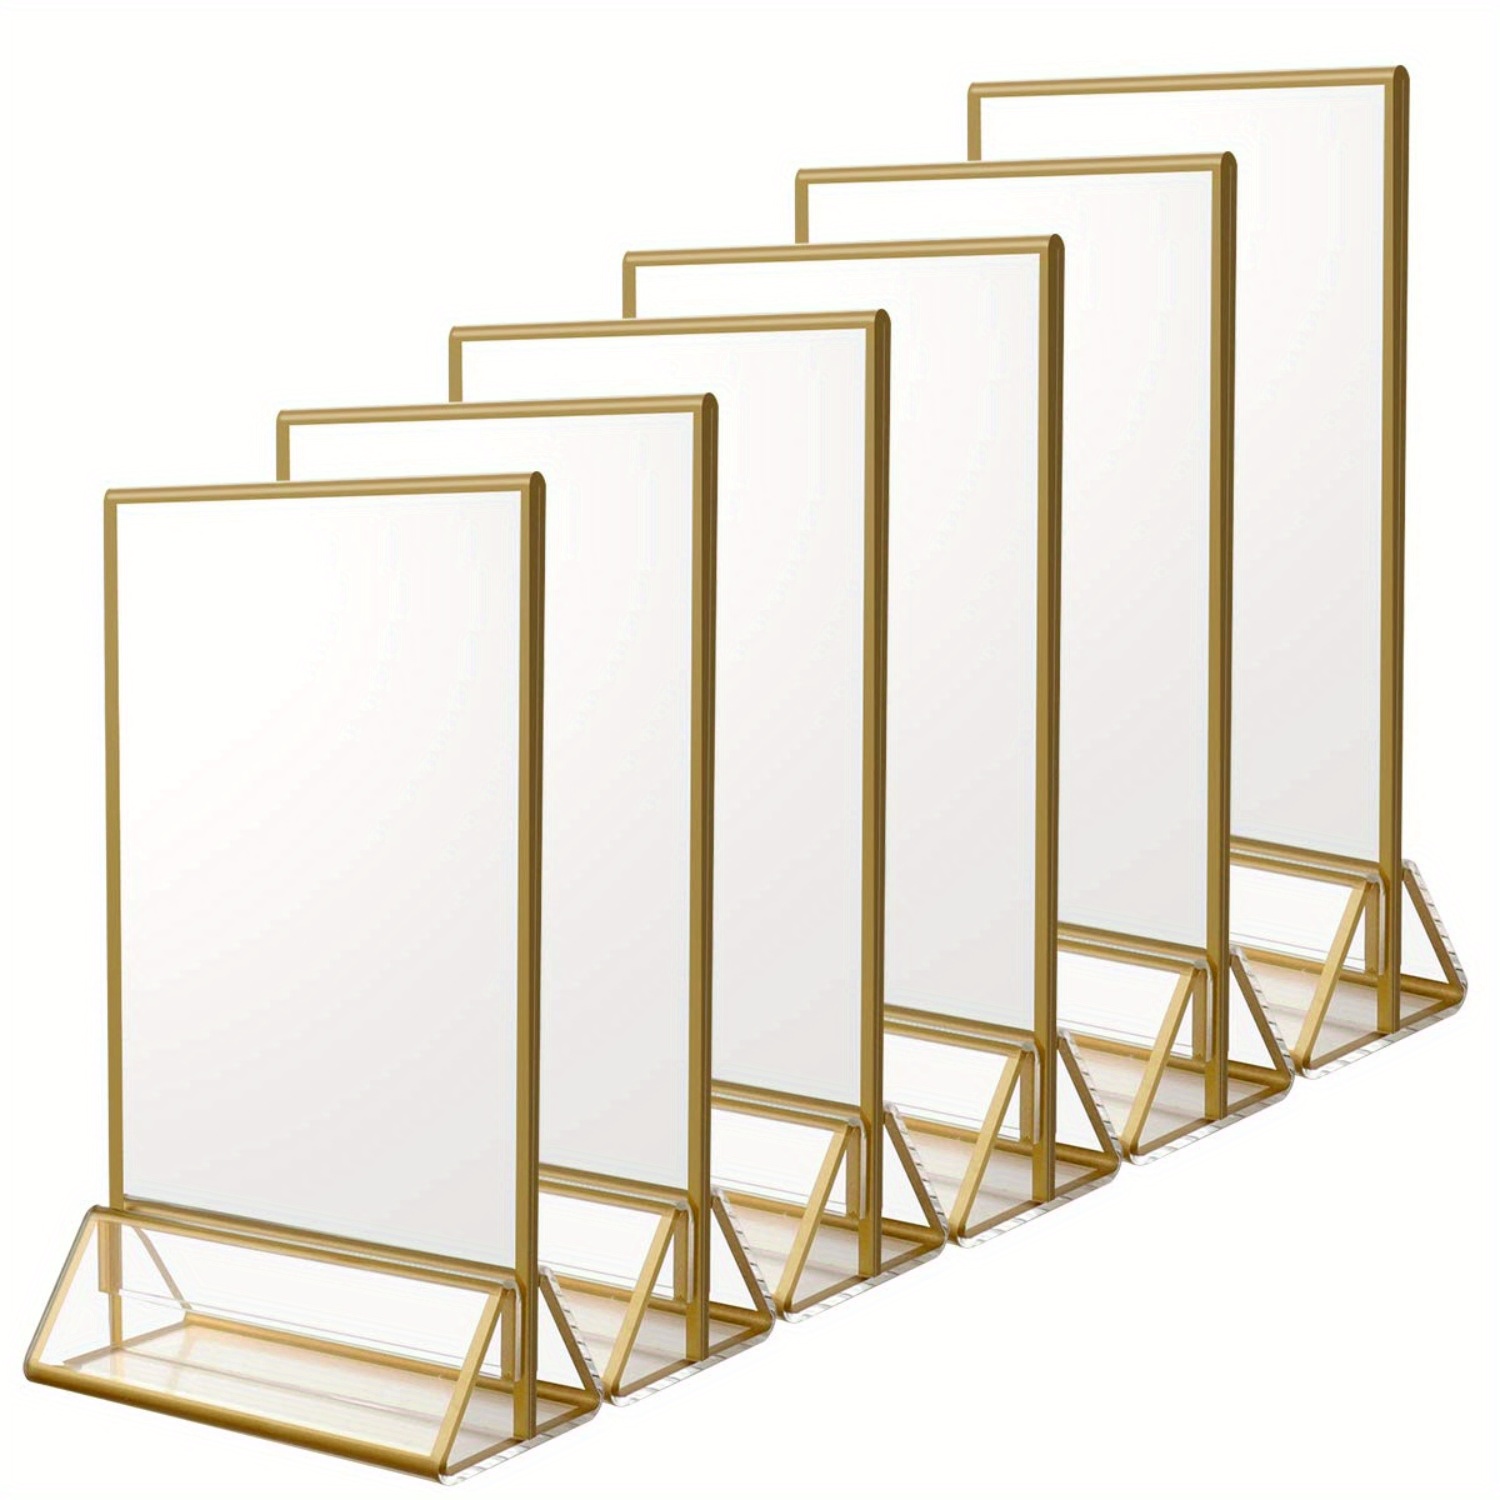 

6pack, 5 X 7 Clear Acrylic Wedding Table Number Holder Stands With Golden Borders, Double Sided Picture Frames Sign For Restaurant Menu Recipe Cards Photo Display, Table Decor